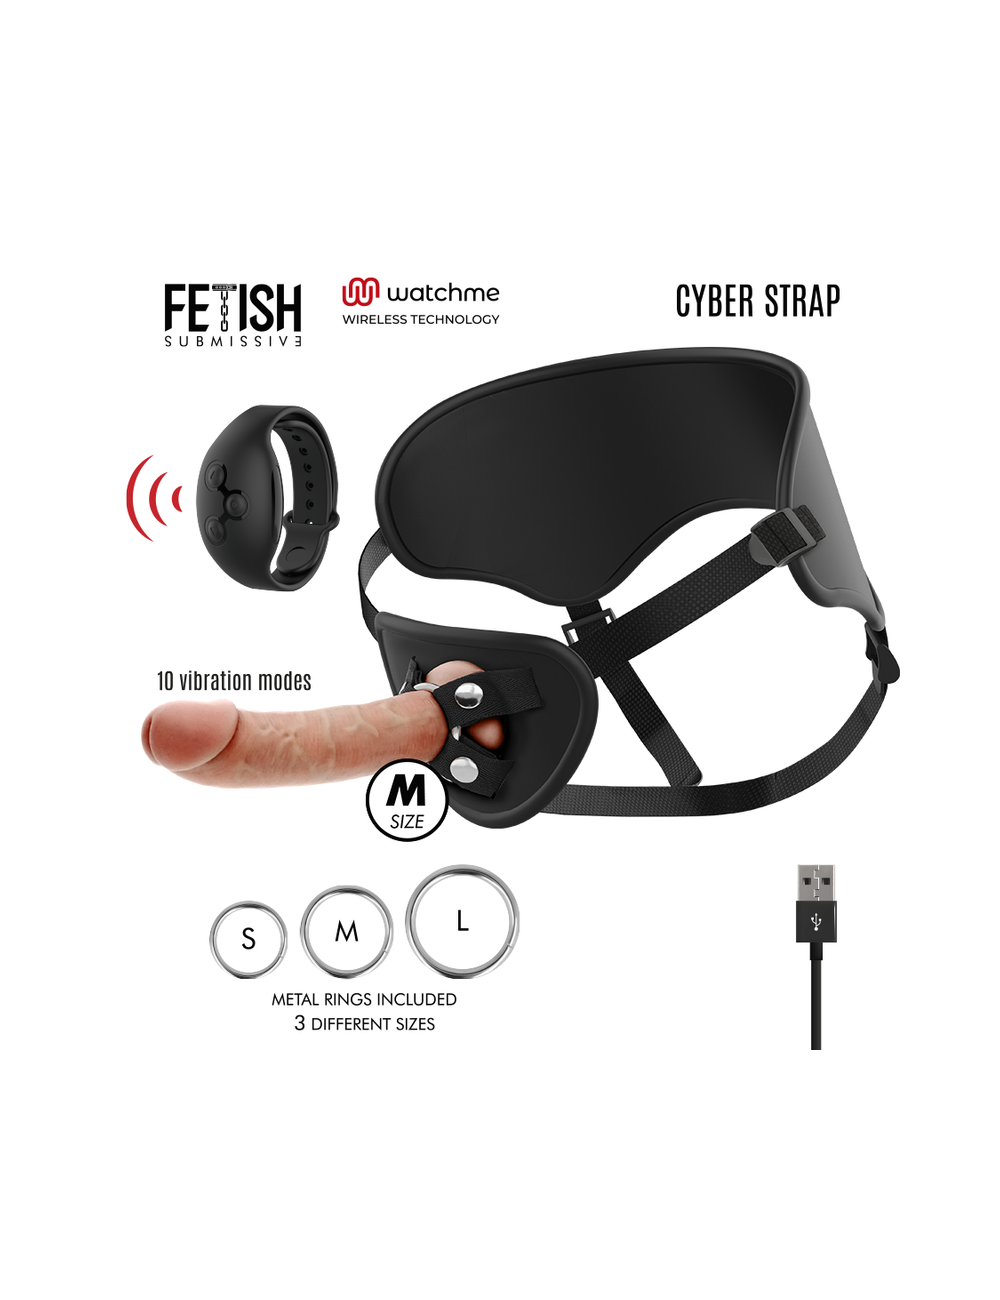 Sextoys - Godes & Plugs - CYBER STRAP REMOTE CONTROL HARNESS WATCME TECHNOLOGY M - FETISH SUBMISSIVE CYBER STRAP